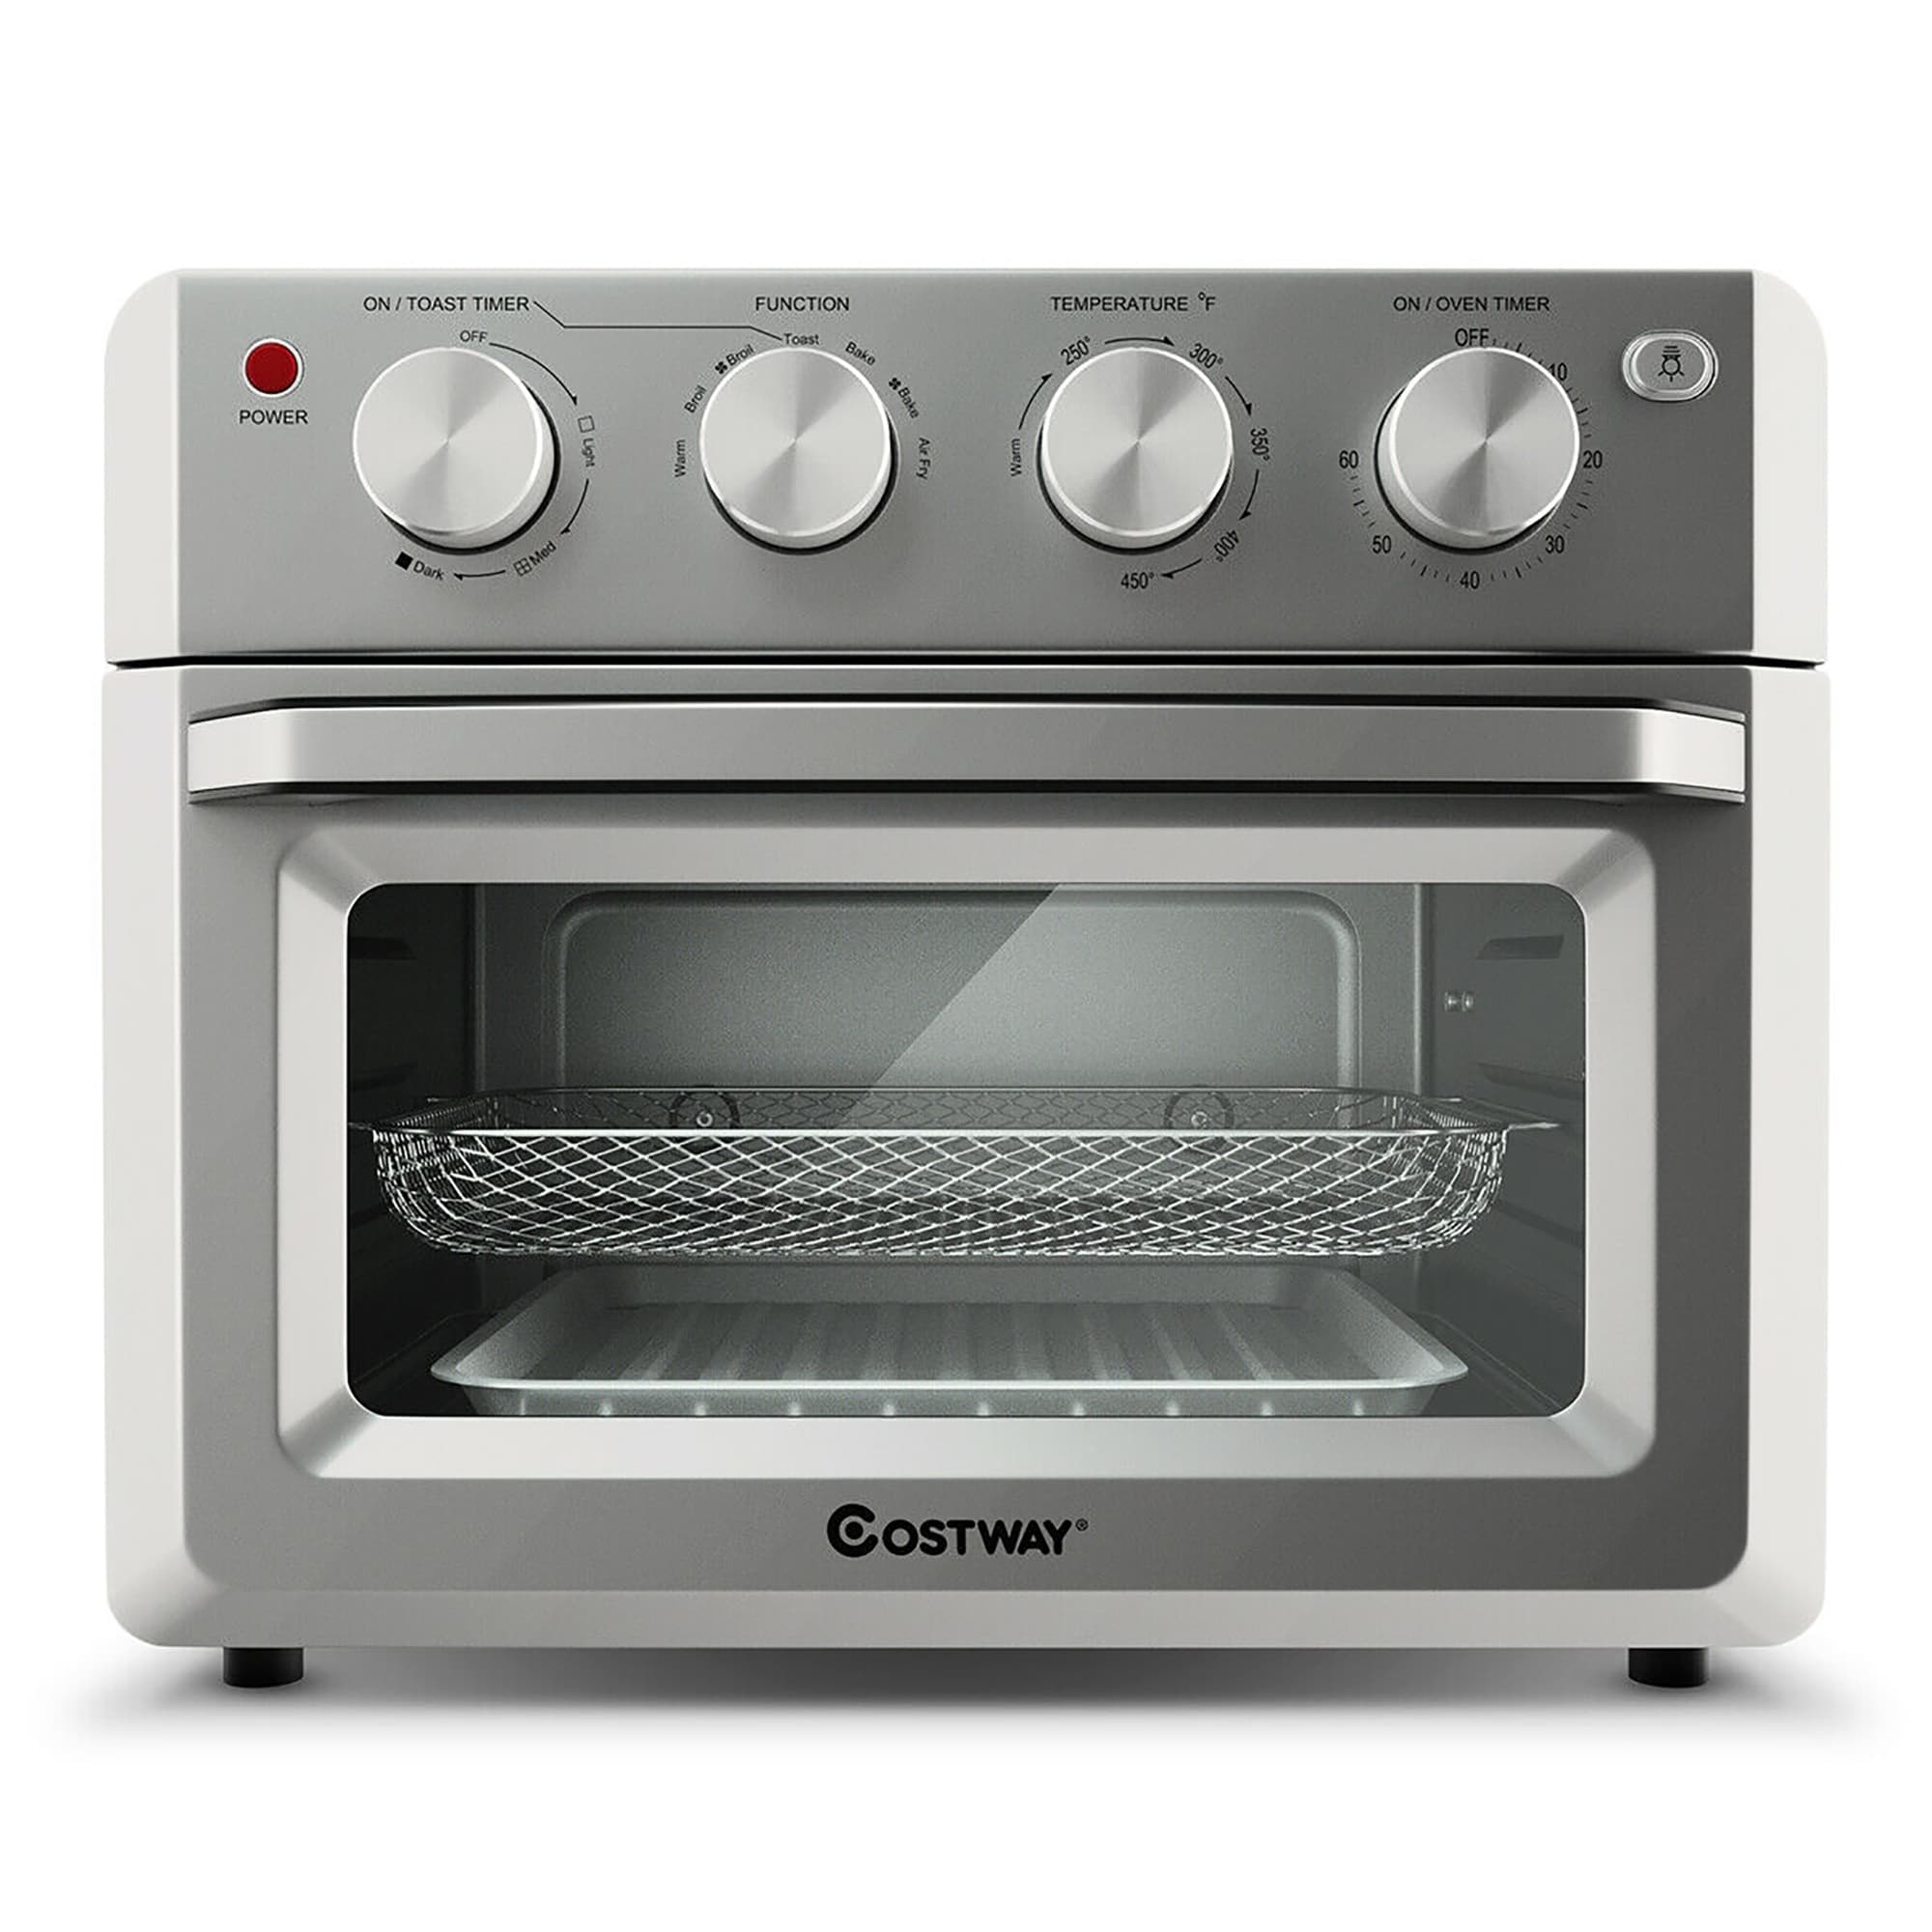 LNC Air Fryer Toaster Oven Combo-Silver